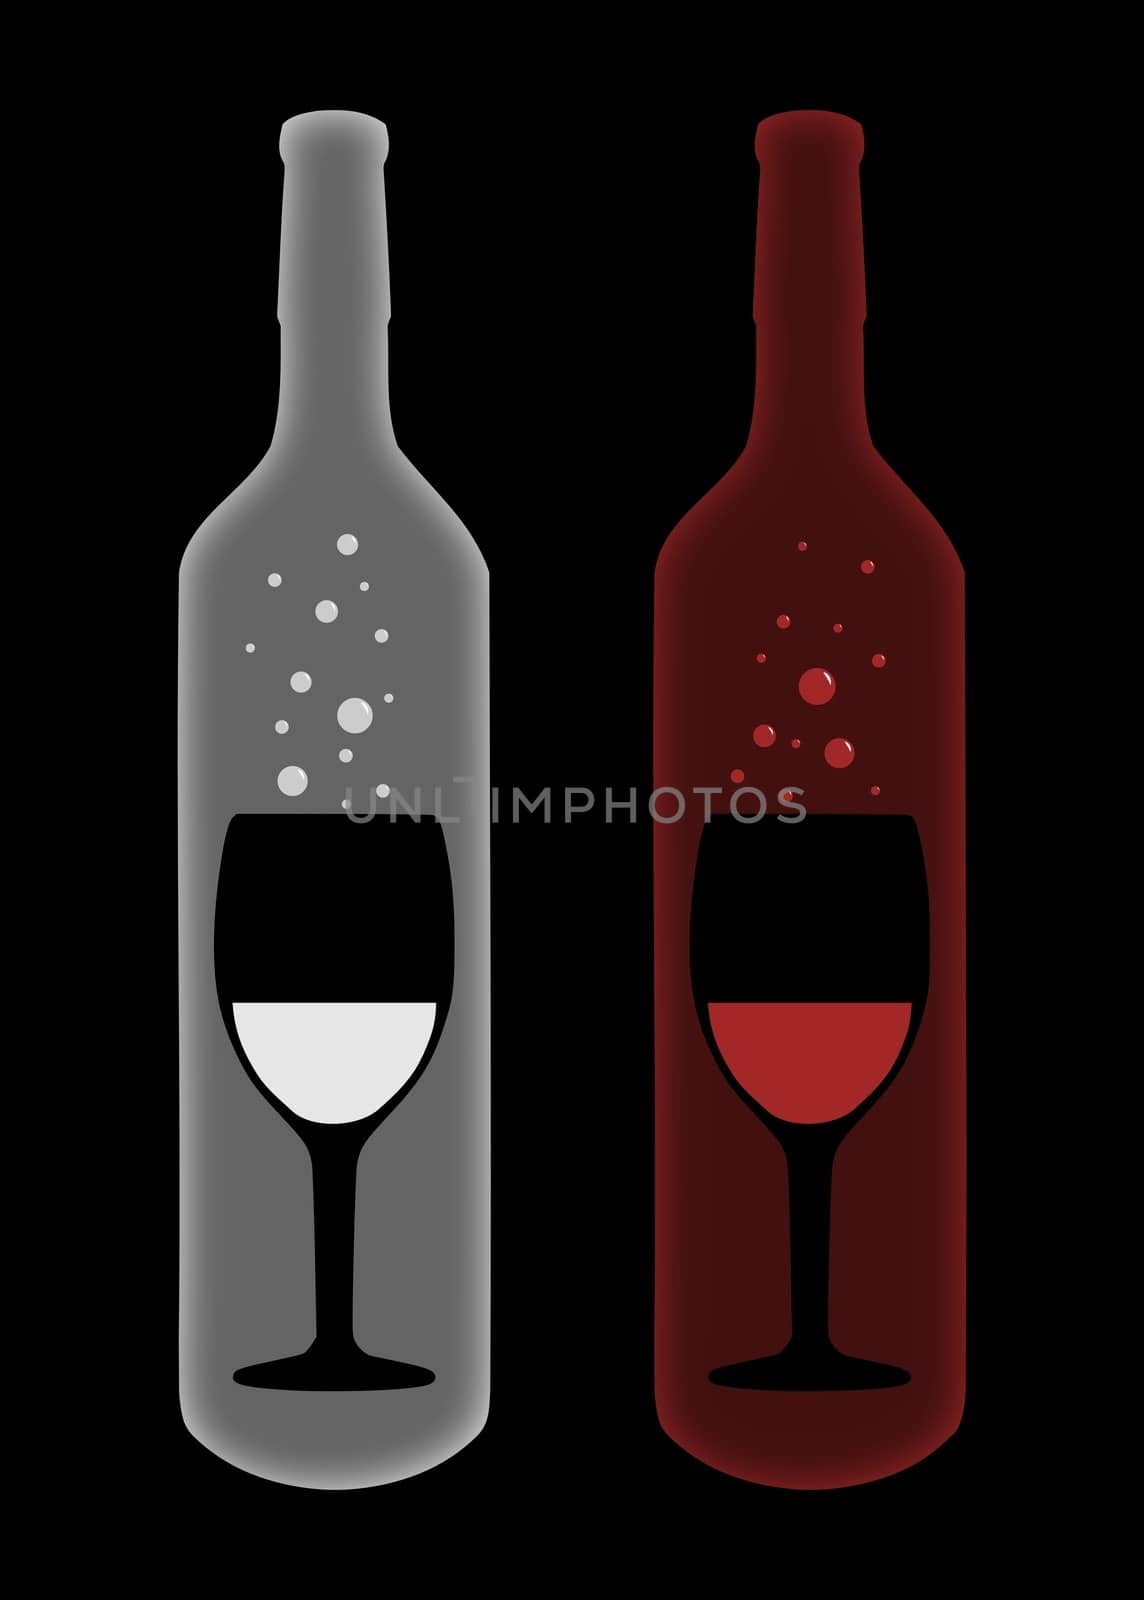 Illustration of bubbling wine glasses inside a bottle of red and white wine